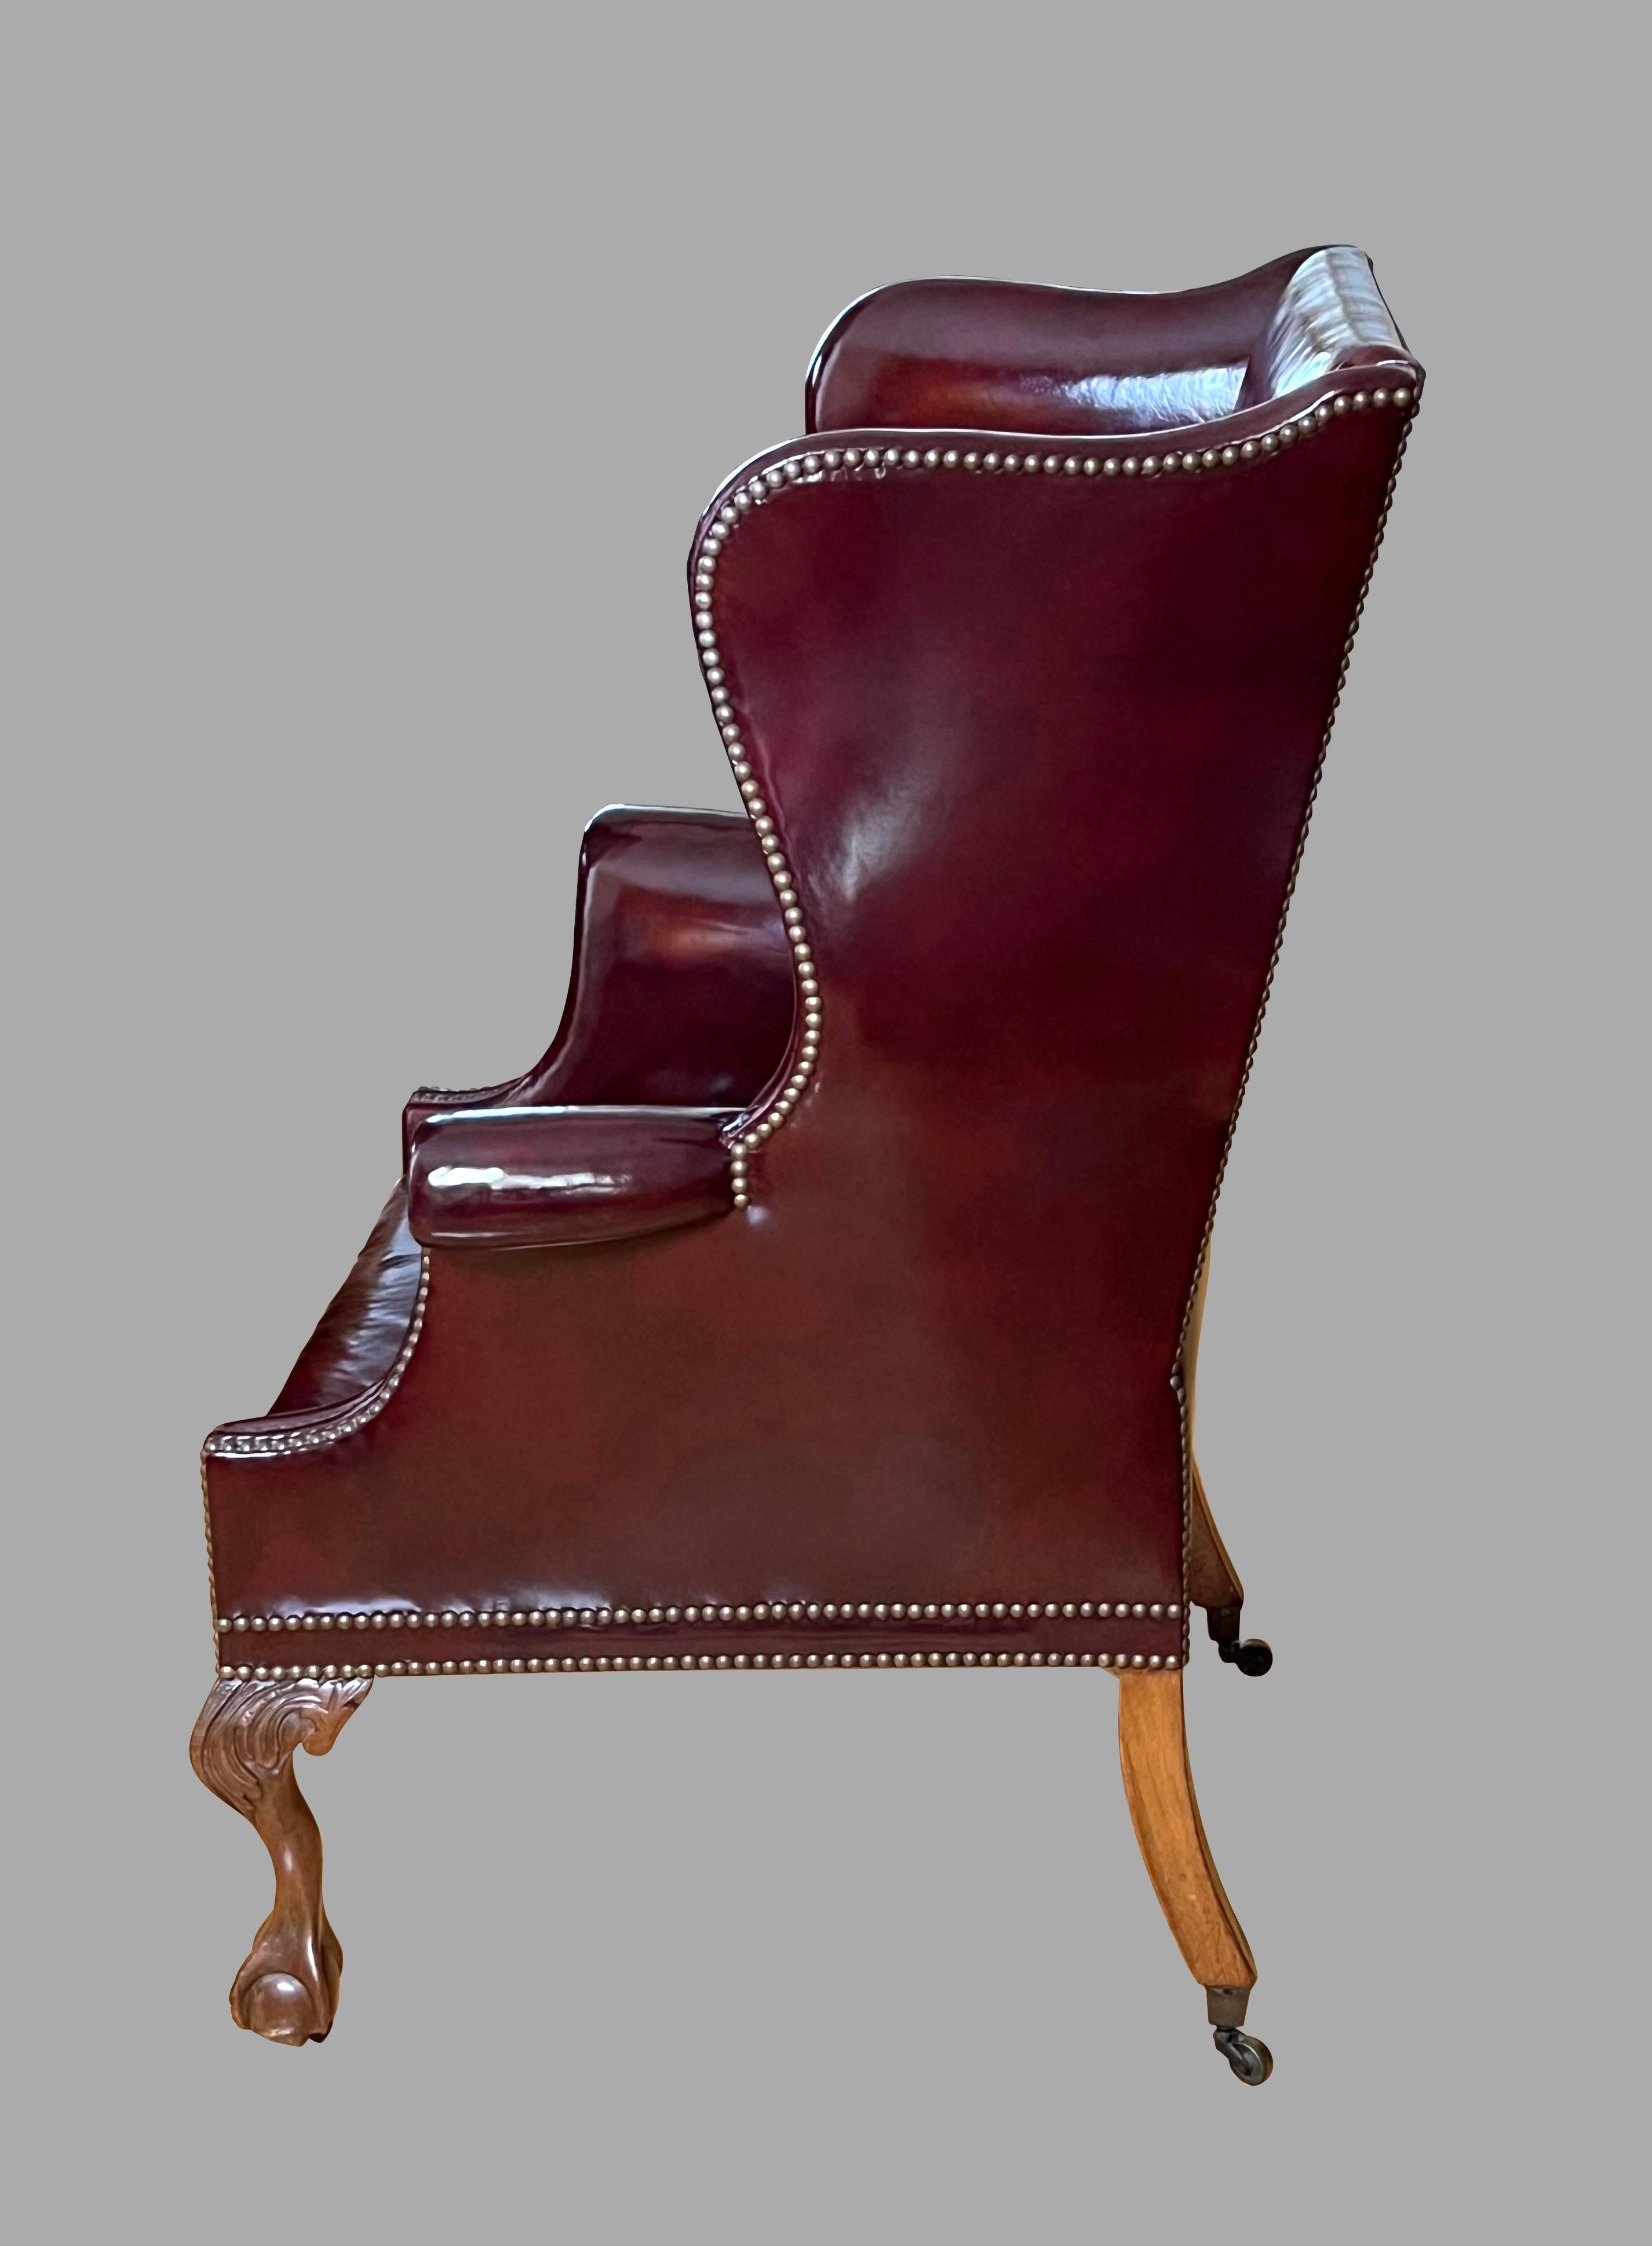 Early 20th Century Large Georgian Style Red Leather Wingback Armchair with Nailhead Trim